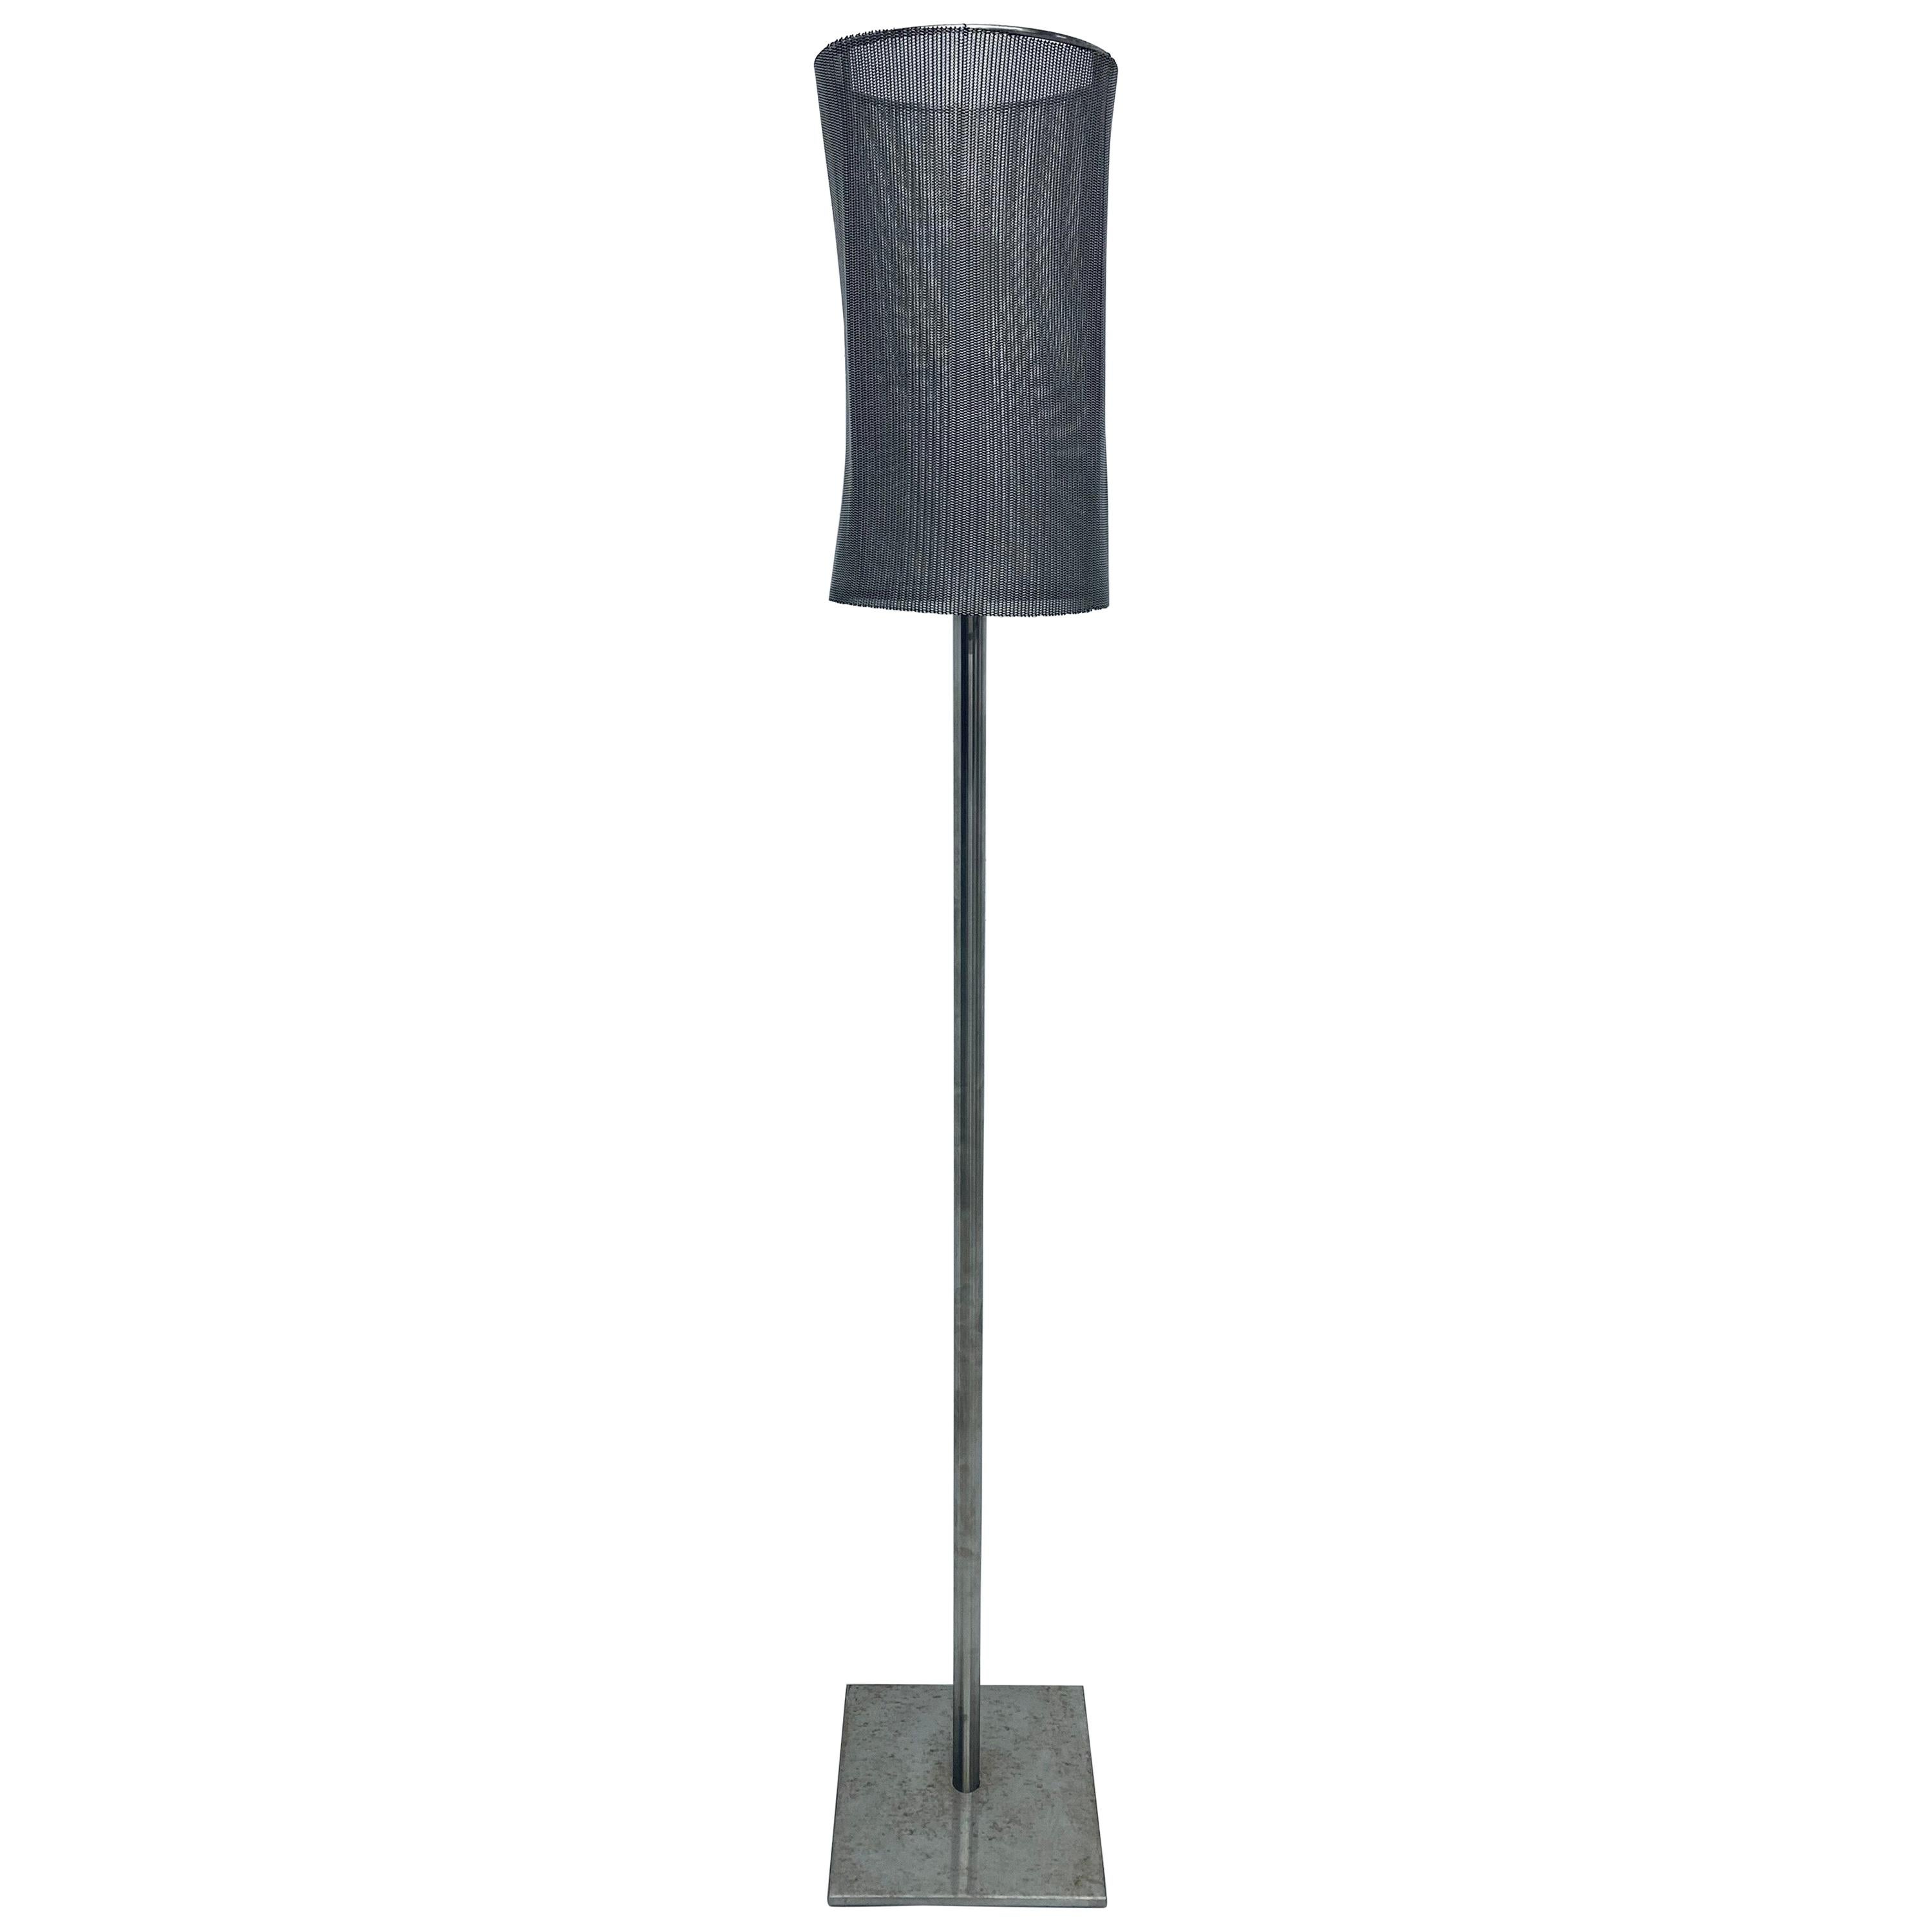 Custom Welded Steel and Mesh Shade Floor Lamp by Automatic, Inc. For Sale